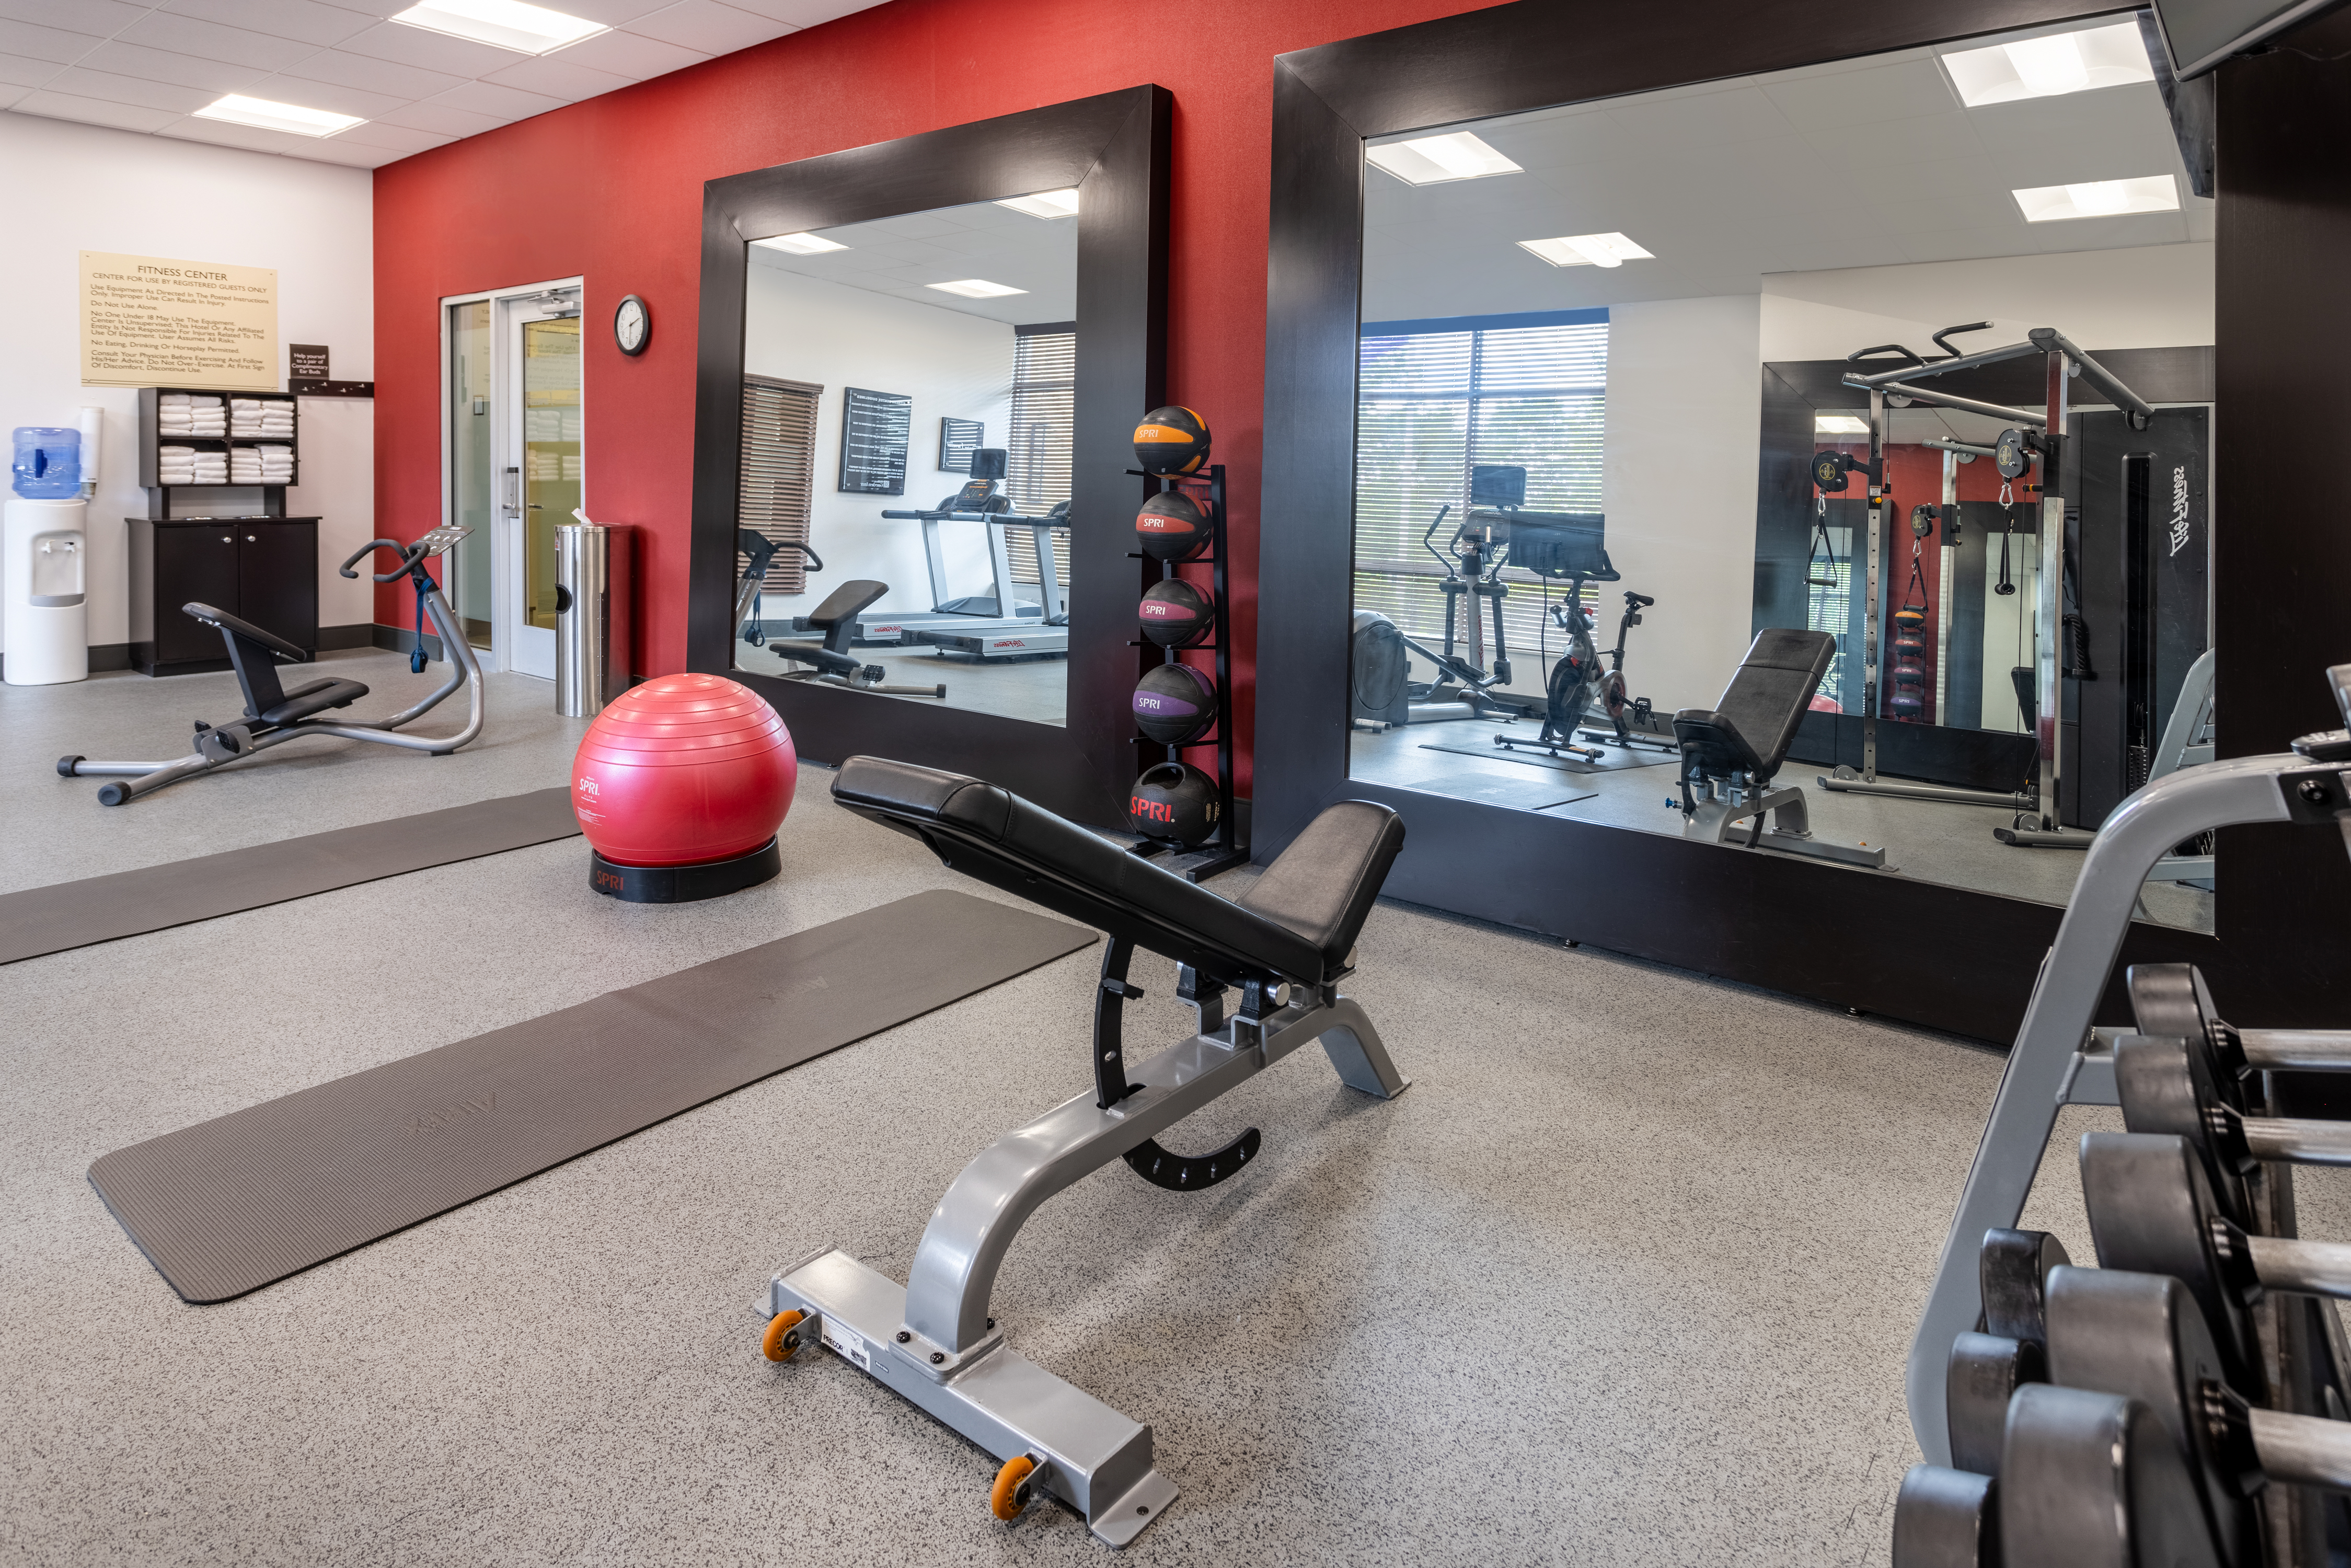 Work up a sweat in our fitness center